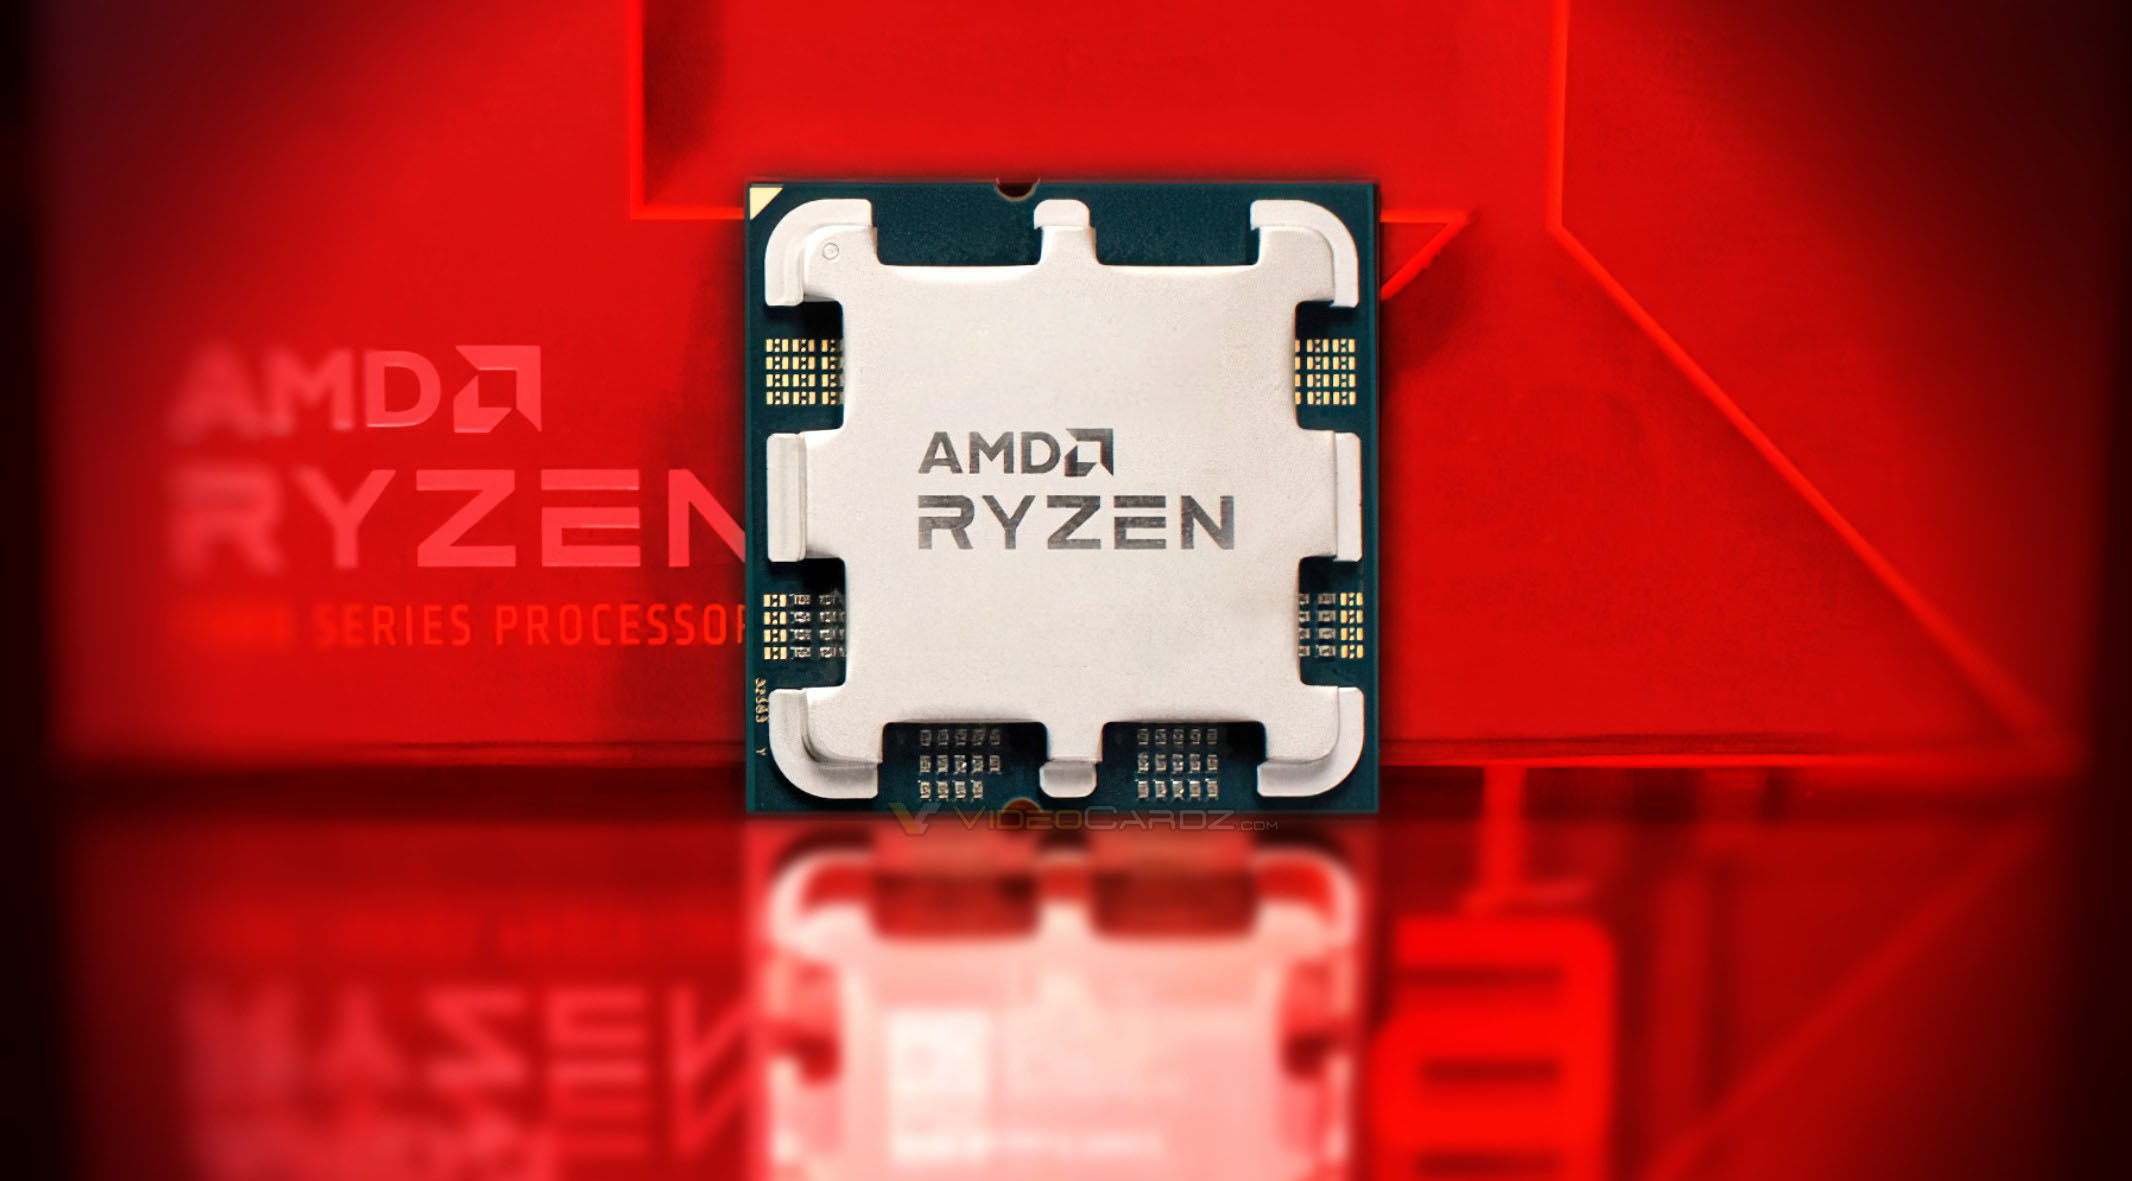 AMD Ryzen 7 7700 non-X CPU allegedly features 8 cores and 65W TDP ...